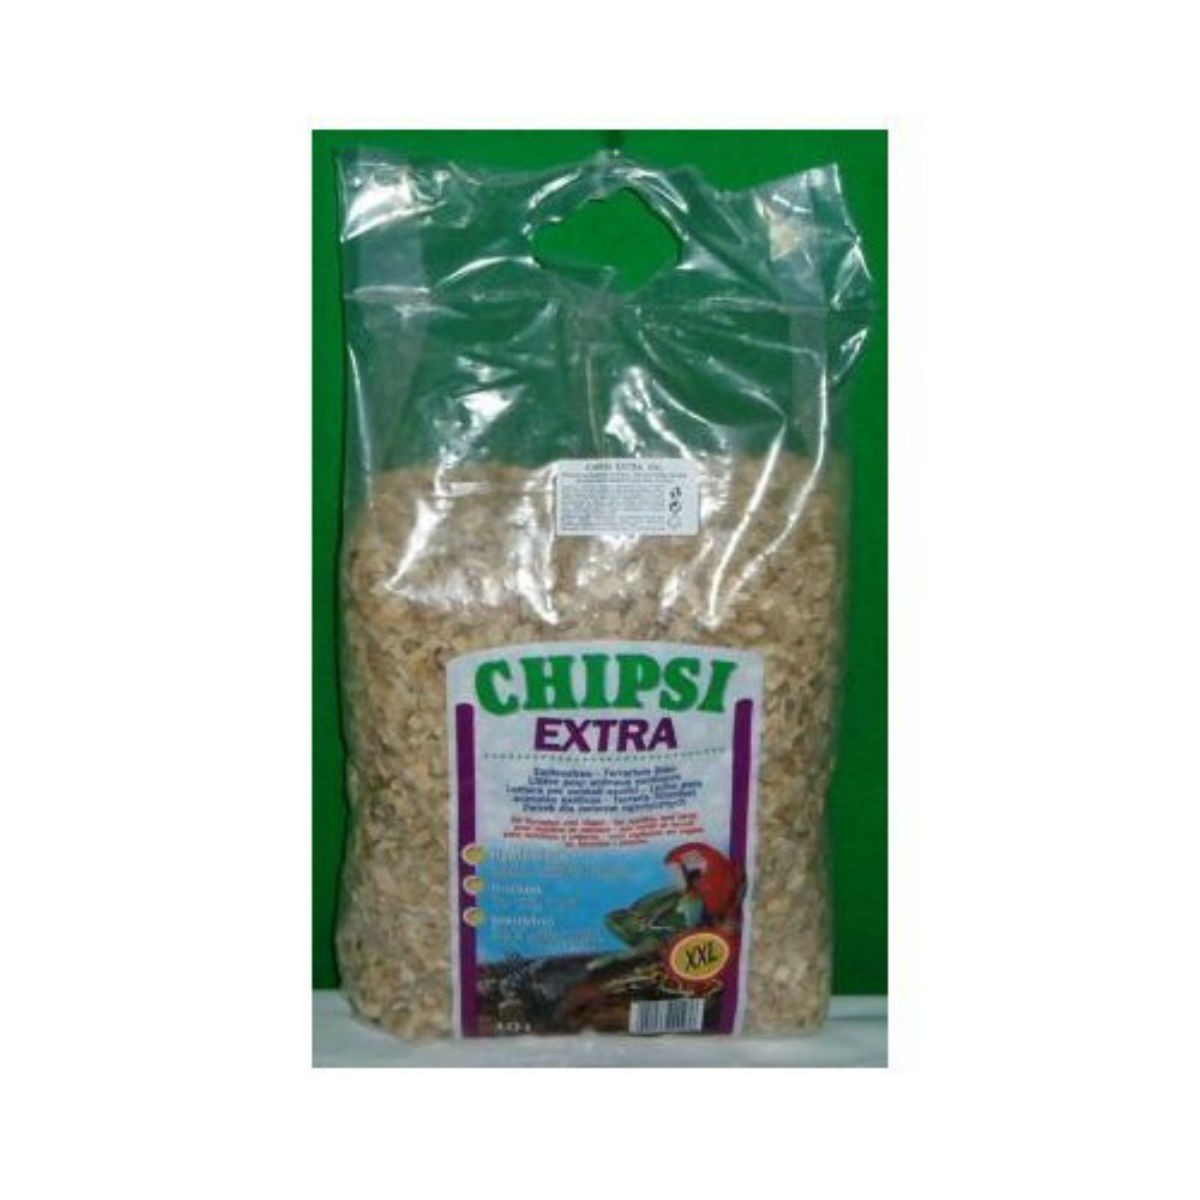 Chipsi Extra wooden chips 10l